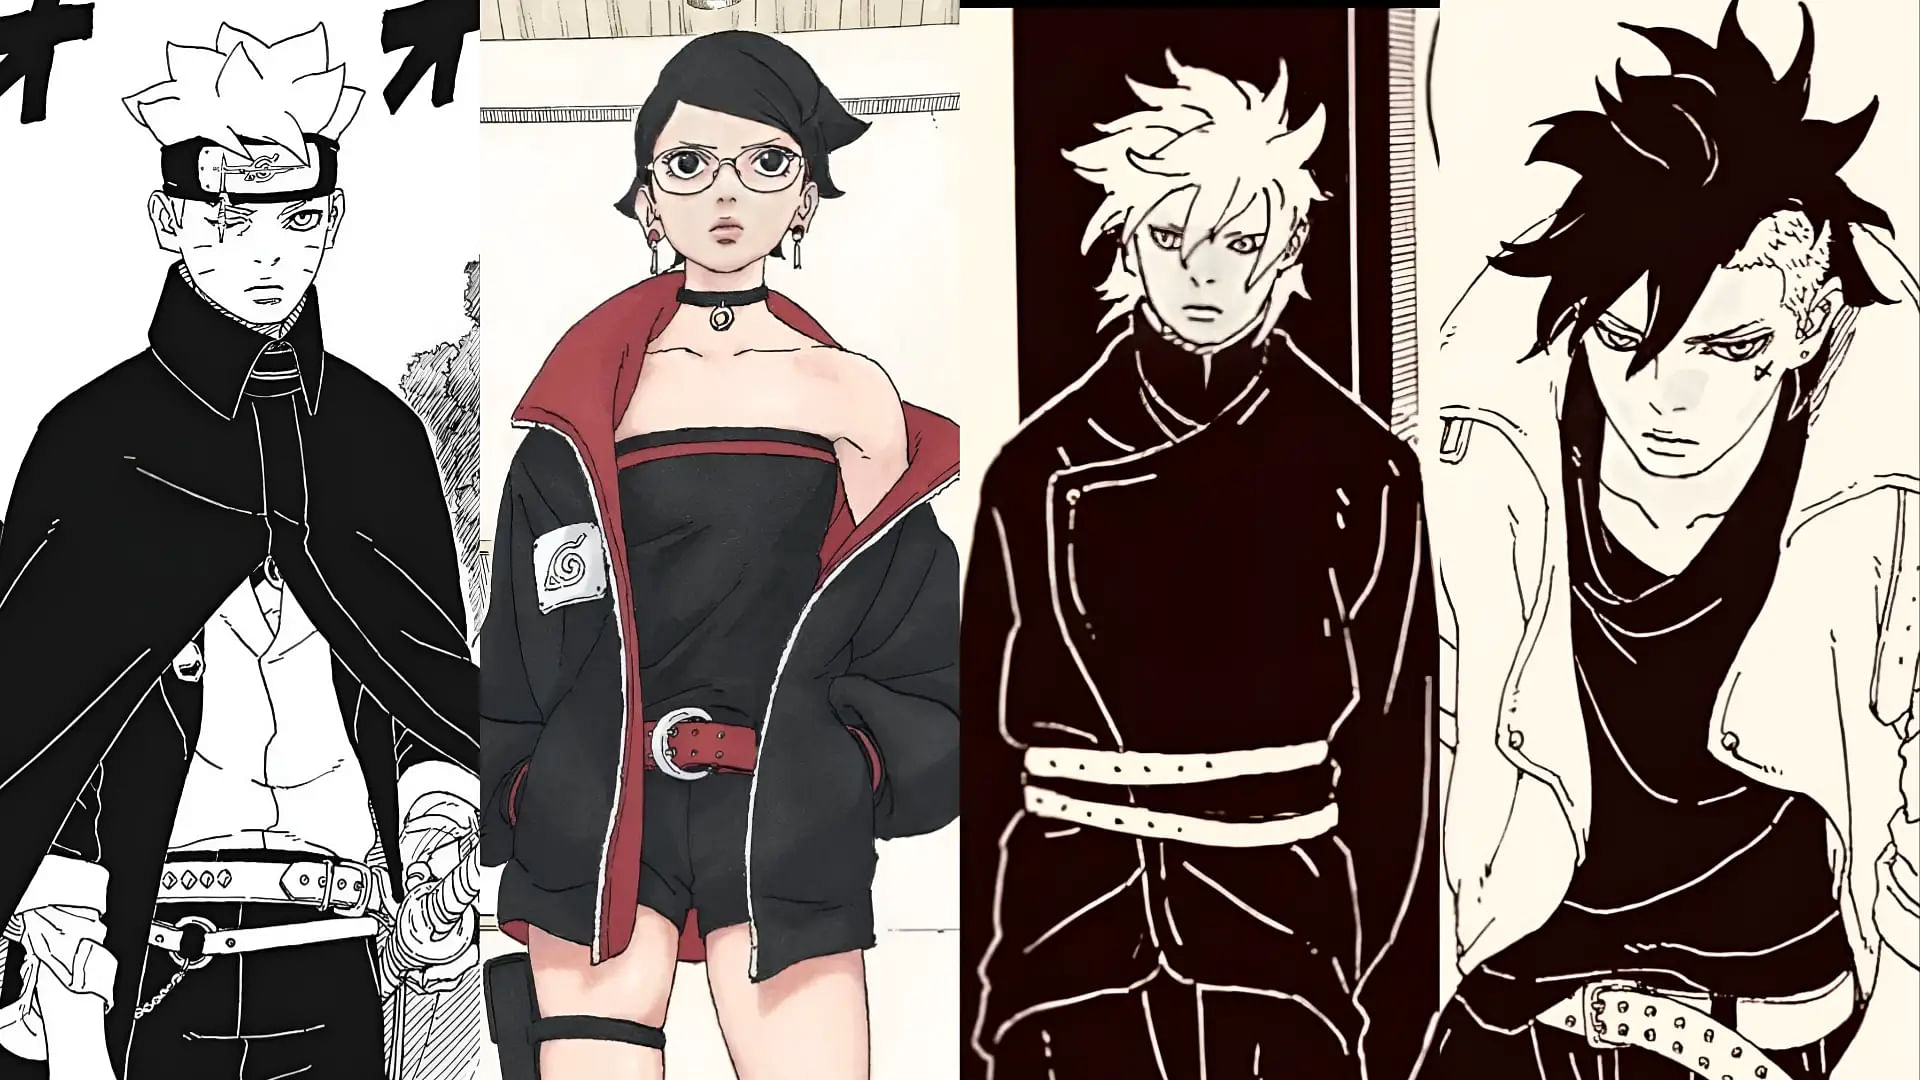 Who is the 8th Hokage in Boruto Two Blue Vortex? Shocking identity